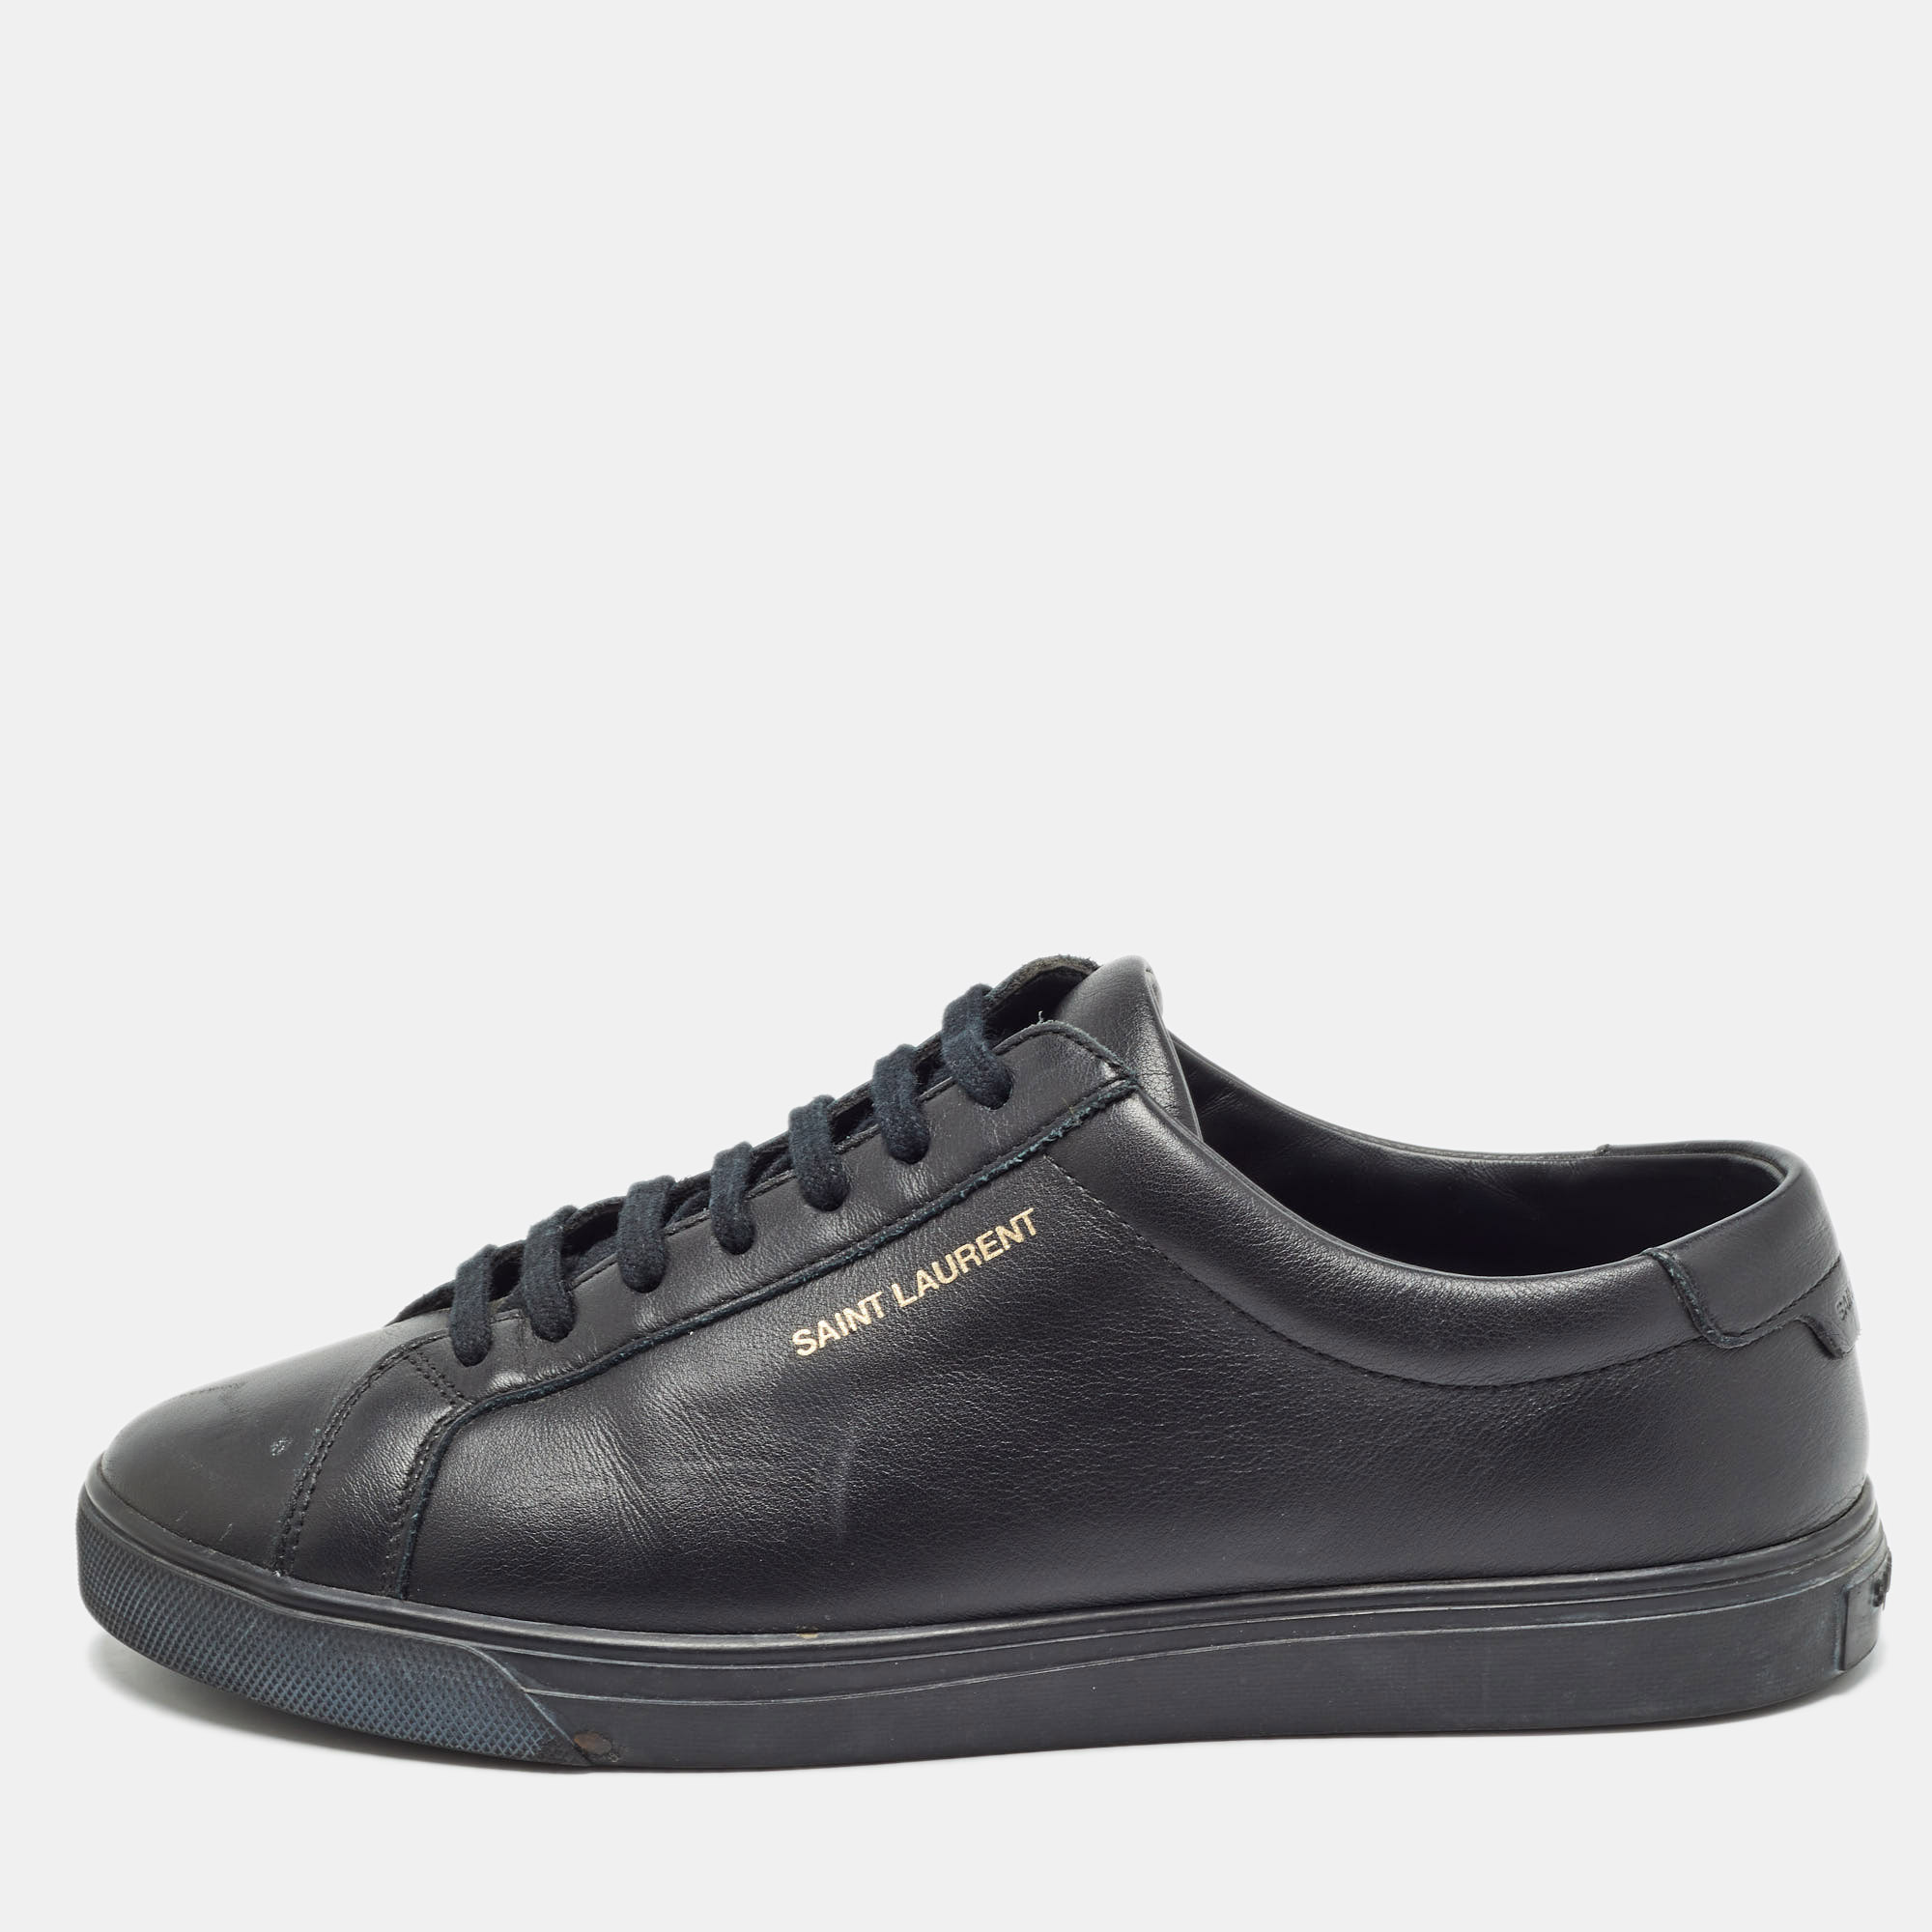 

Saint Laurent Black Leather Andy Sneakers Size